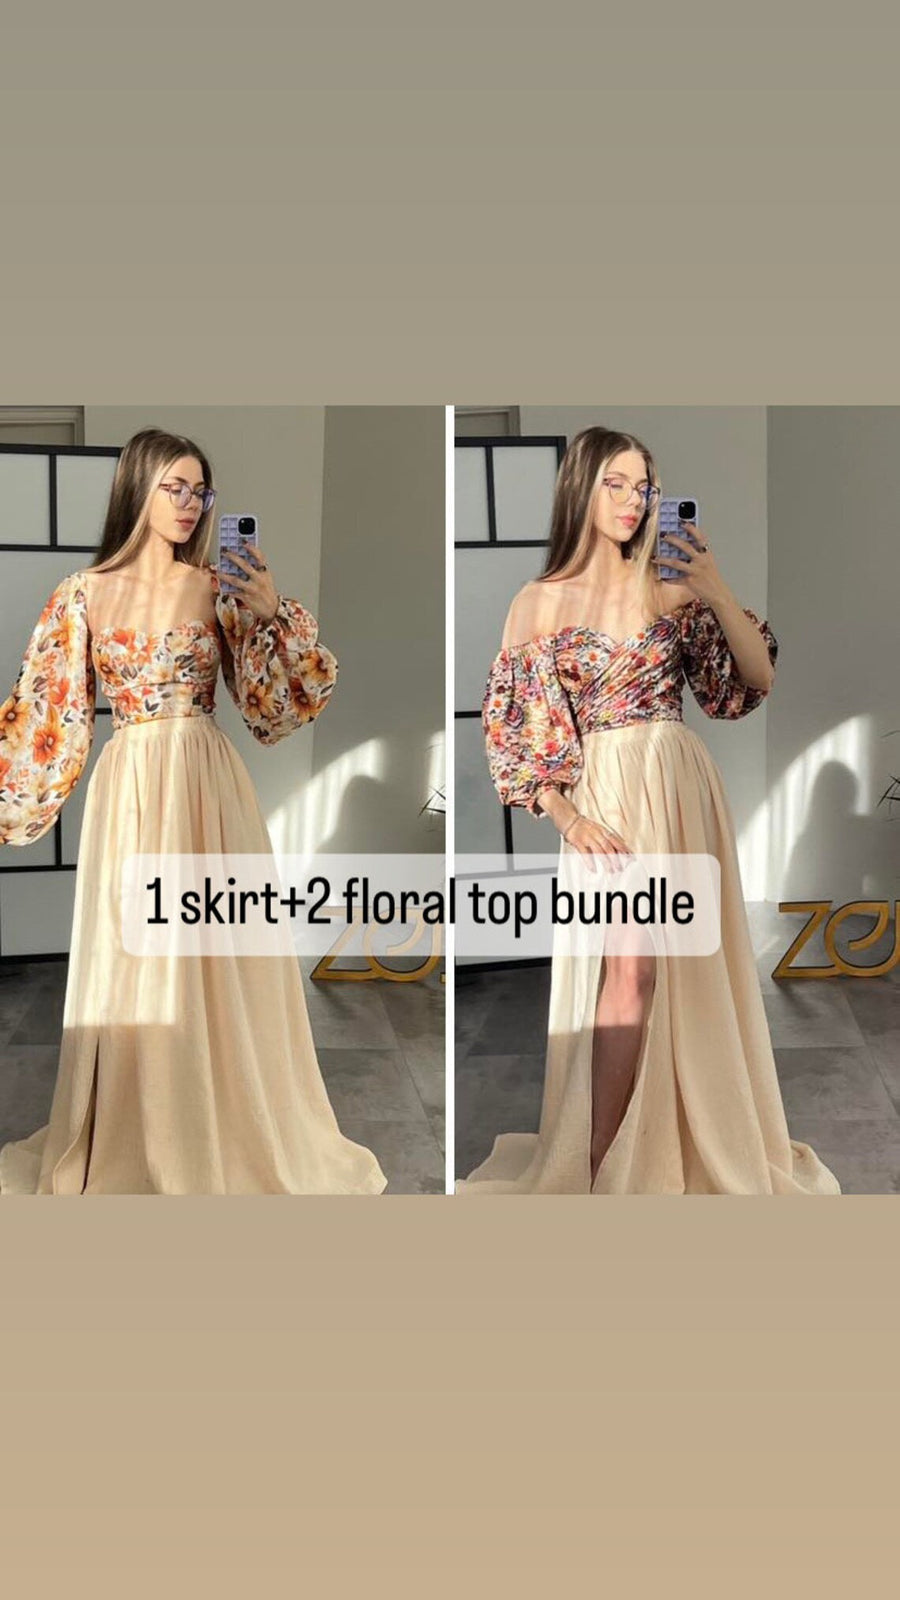 Limited offer 2 Floral tops+ 1 Beige Skirt for Photoshoot